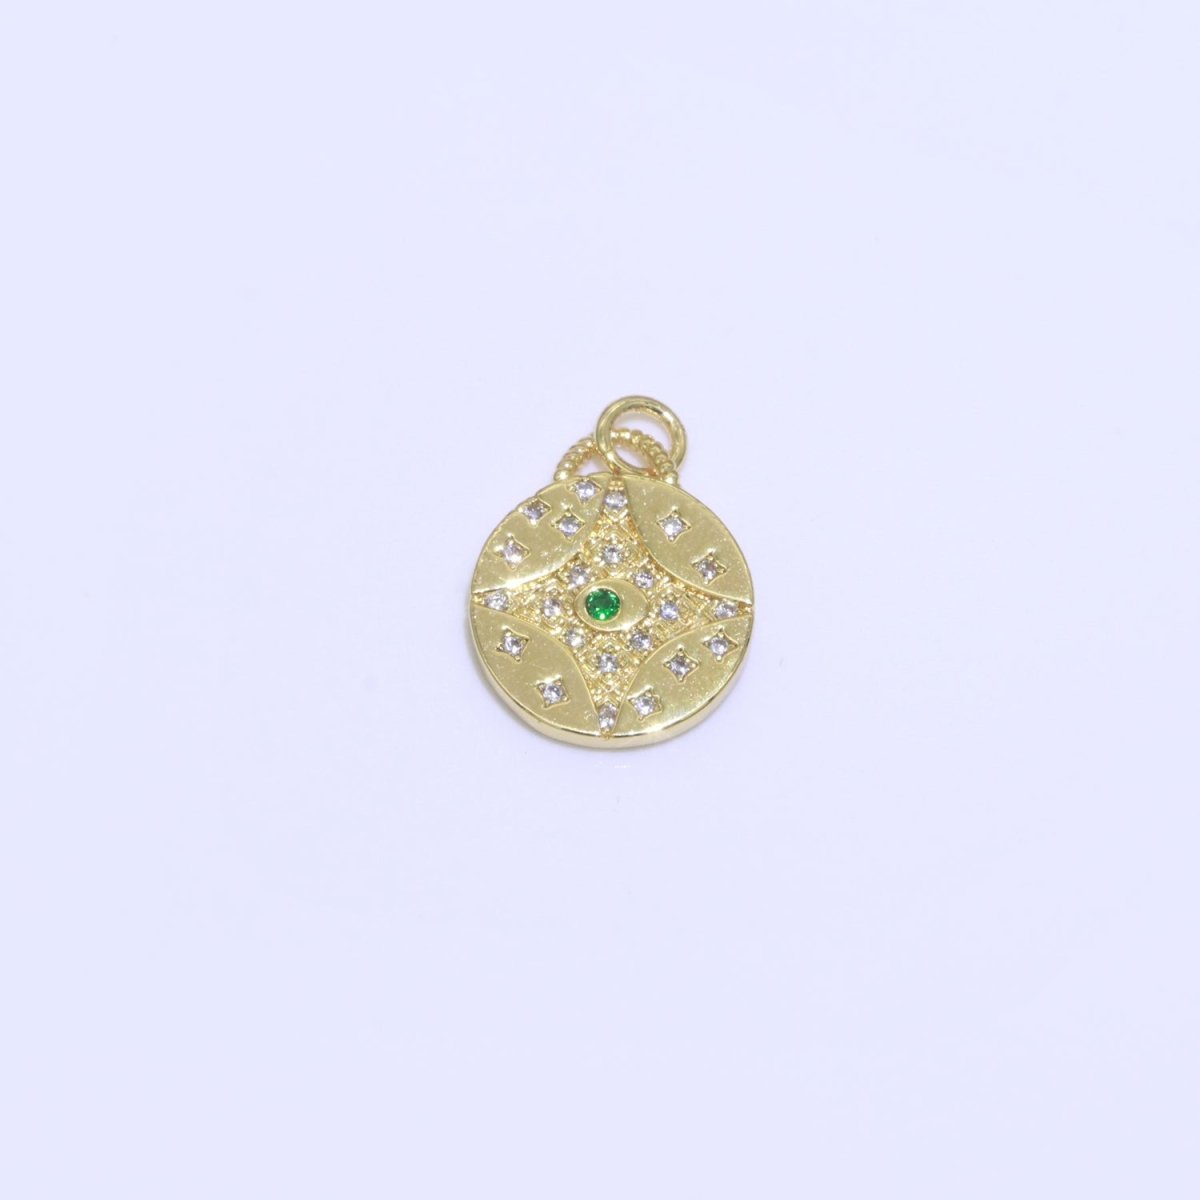 CZ Micro Pave Star Evil Eye Star on Coin Round Shape Pendant Charm Micro Pave Dainty Gold Charm for Necklace Bracelet Earring Supply M-418 - M-420 - DLUXCA